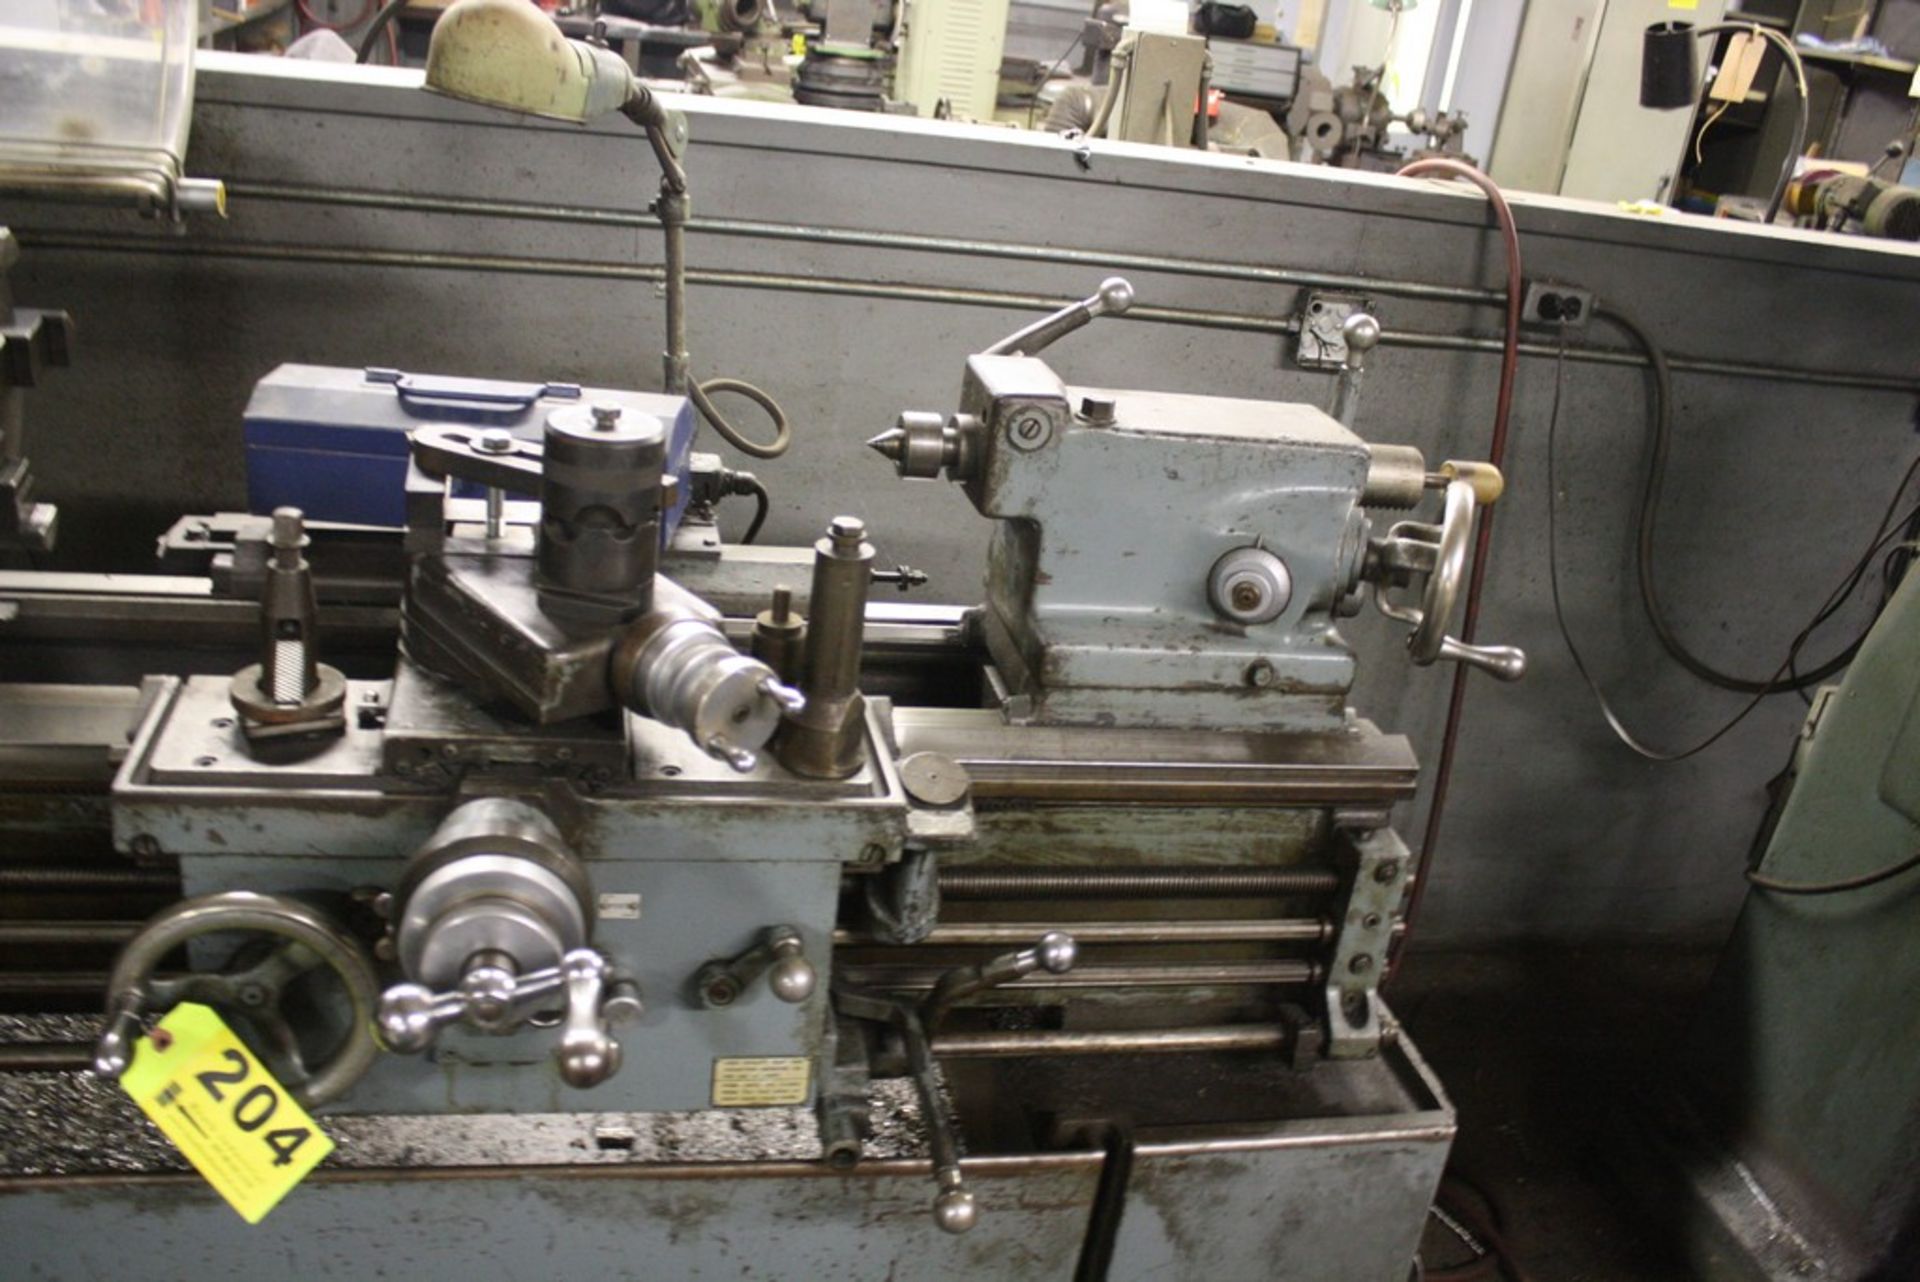 LEBLOND 15" X36" MODEL TOOL & DIE MAKERS LATHE, S/N 6HC-277, 10" 4-JAW CHUCK, 2400 RPM SPINDLE, - Image 4 of 4